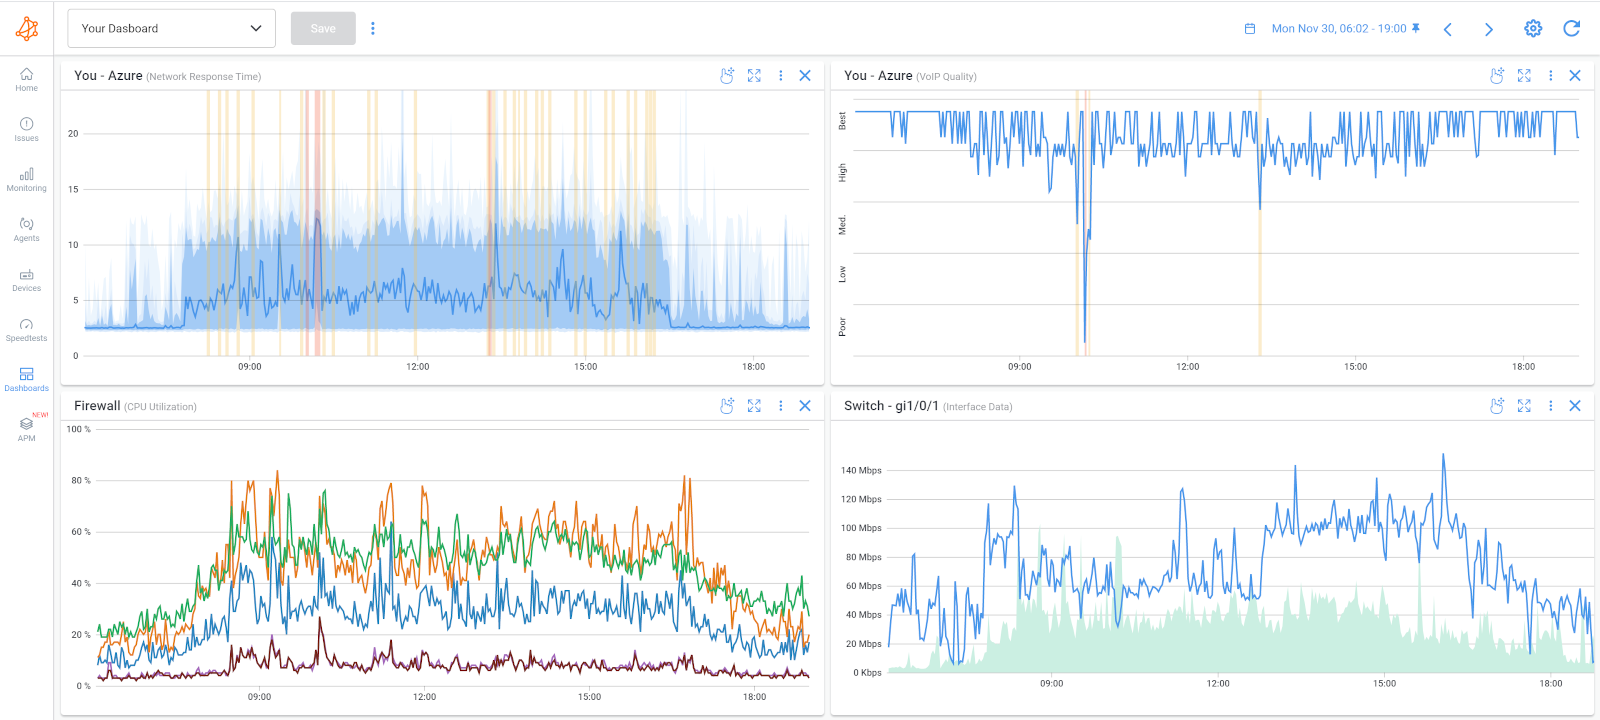 Network Device Monitoring Dashboard